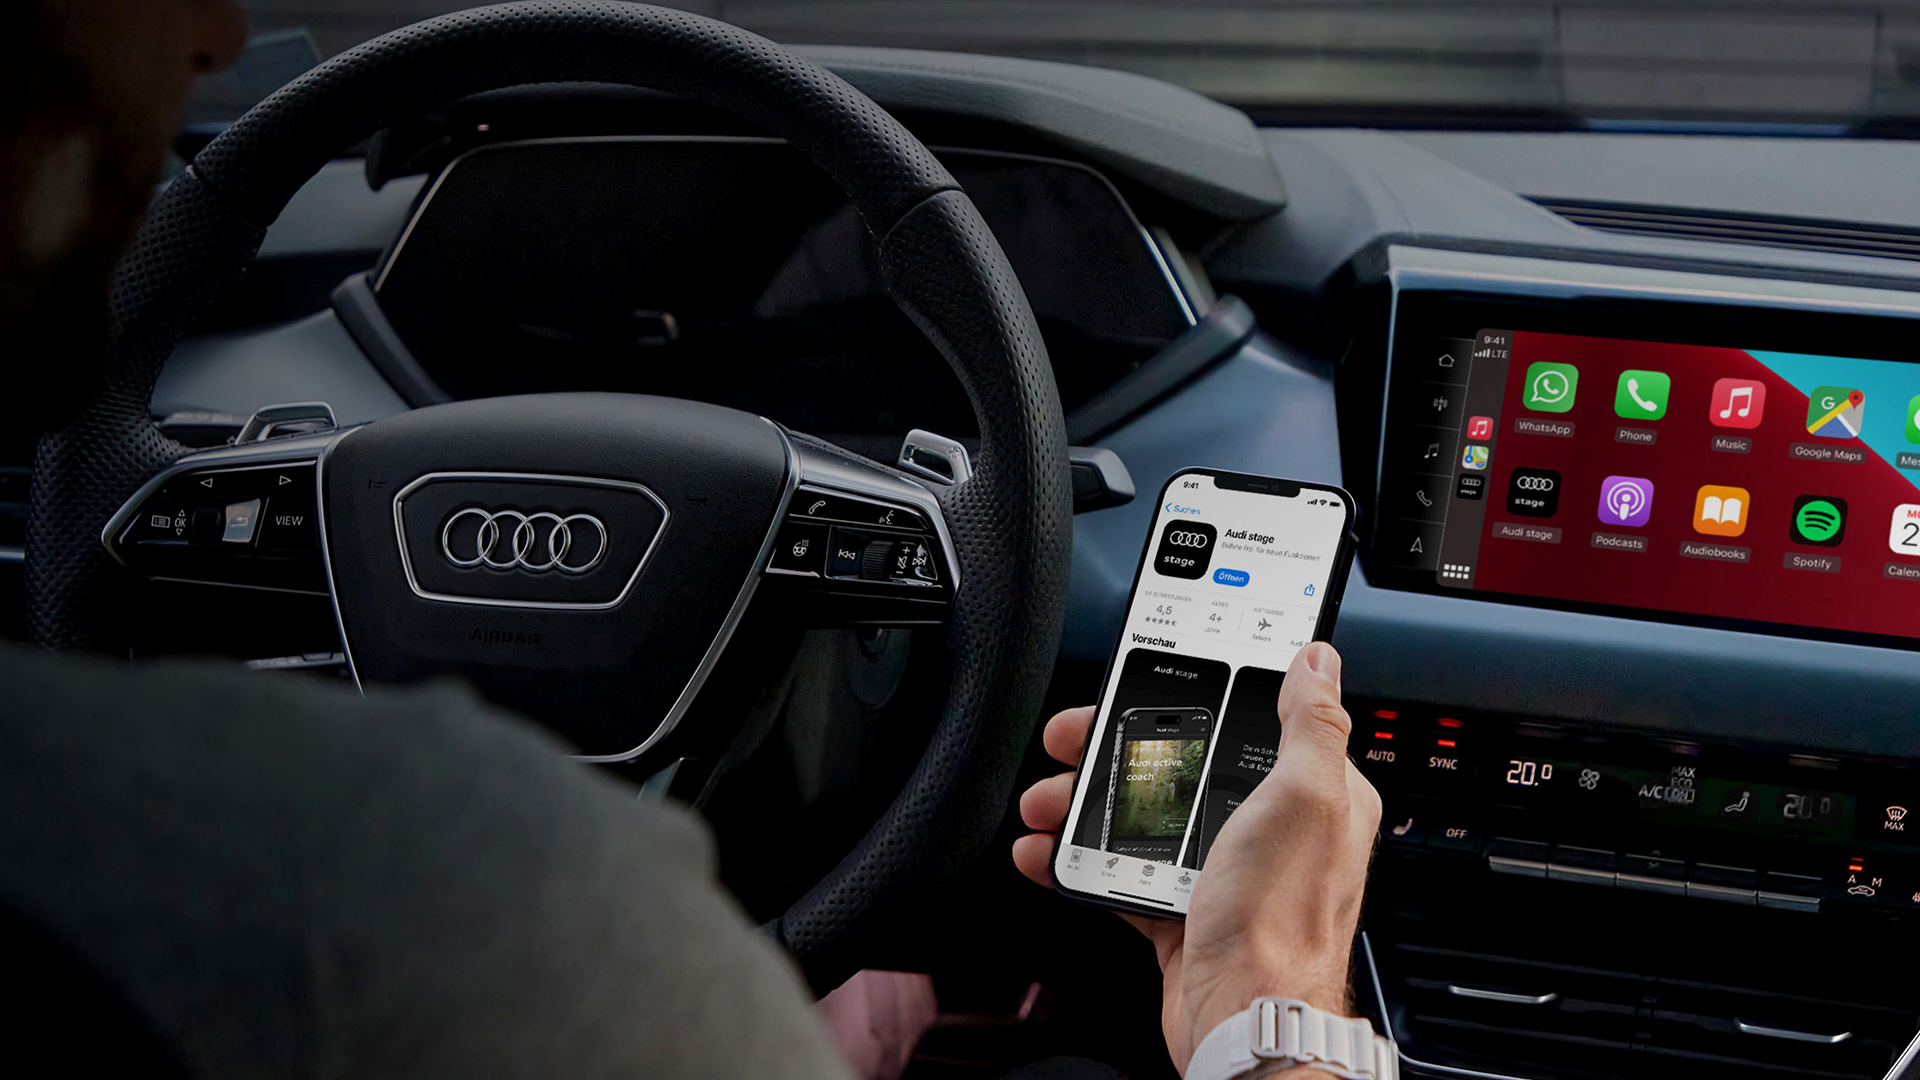 Person sits in the Audi and uses the Audi stage app on their cell phone